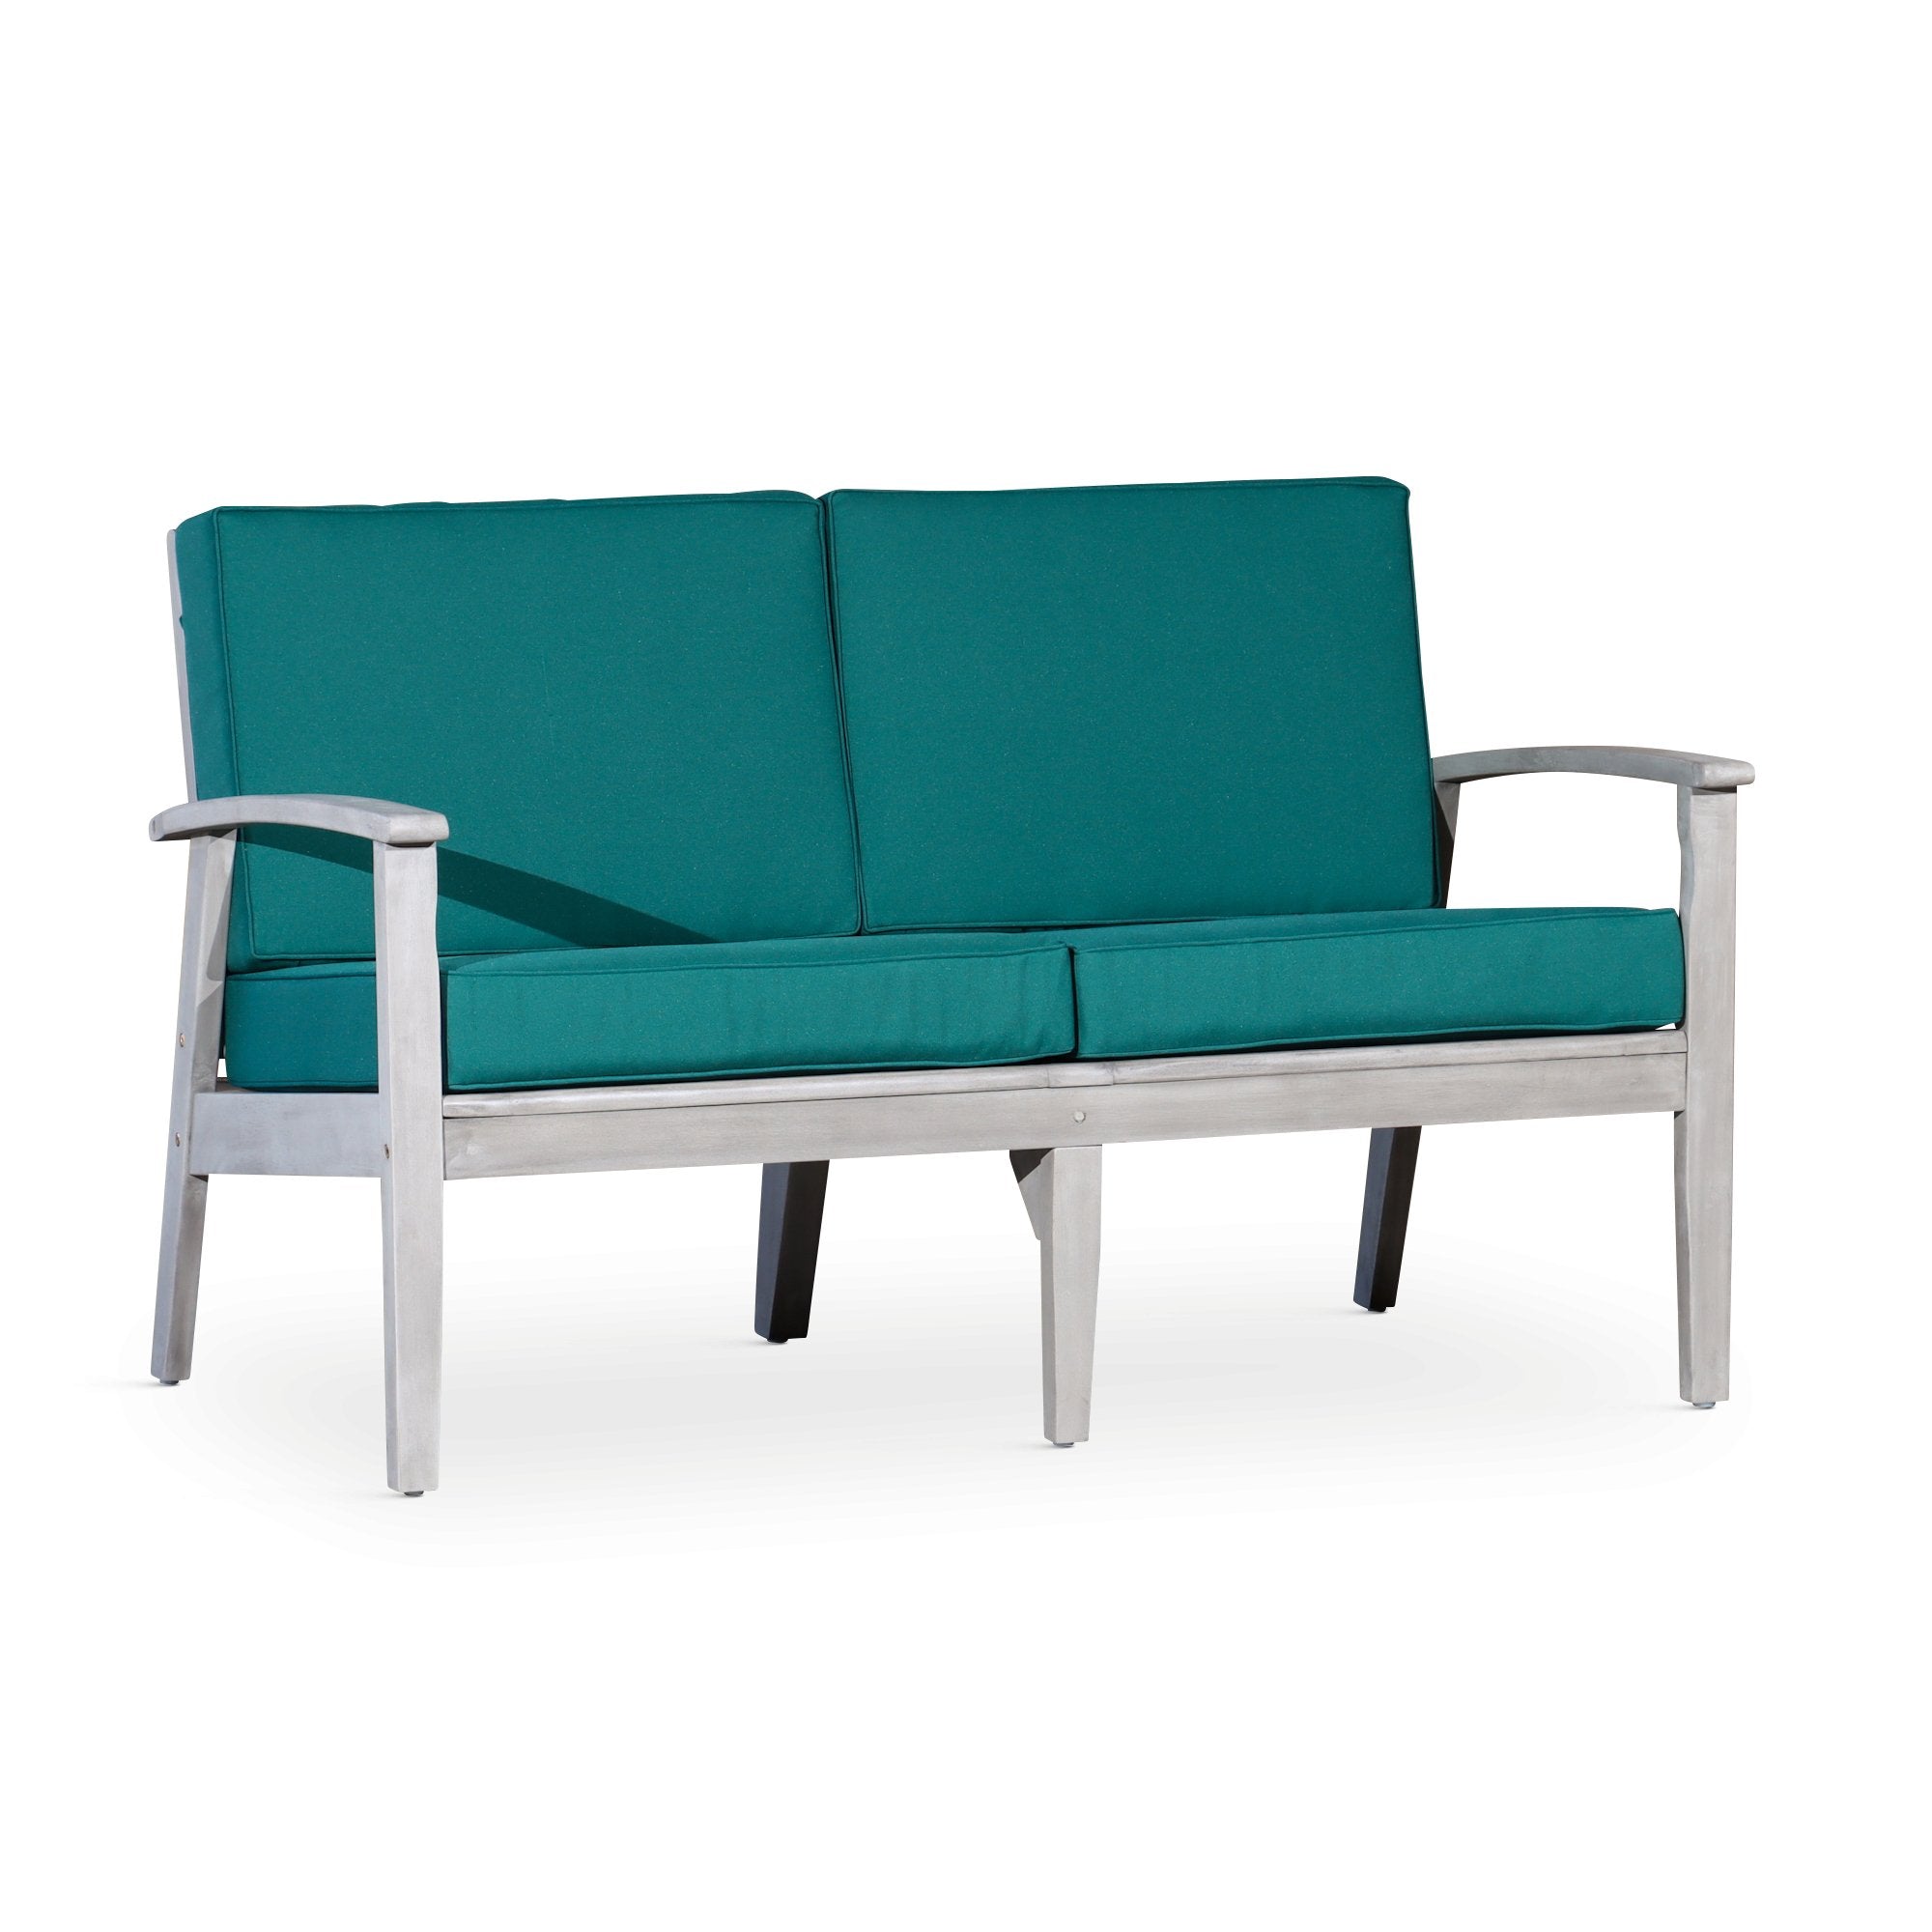 Outdoor-Loveseat-with-Cushions,-Silver-Gray-Finish,-Dark-Green-Cushions-Outdoor-Chairs